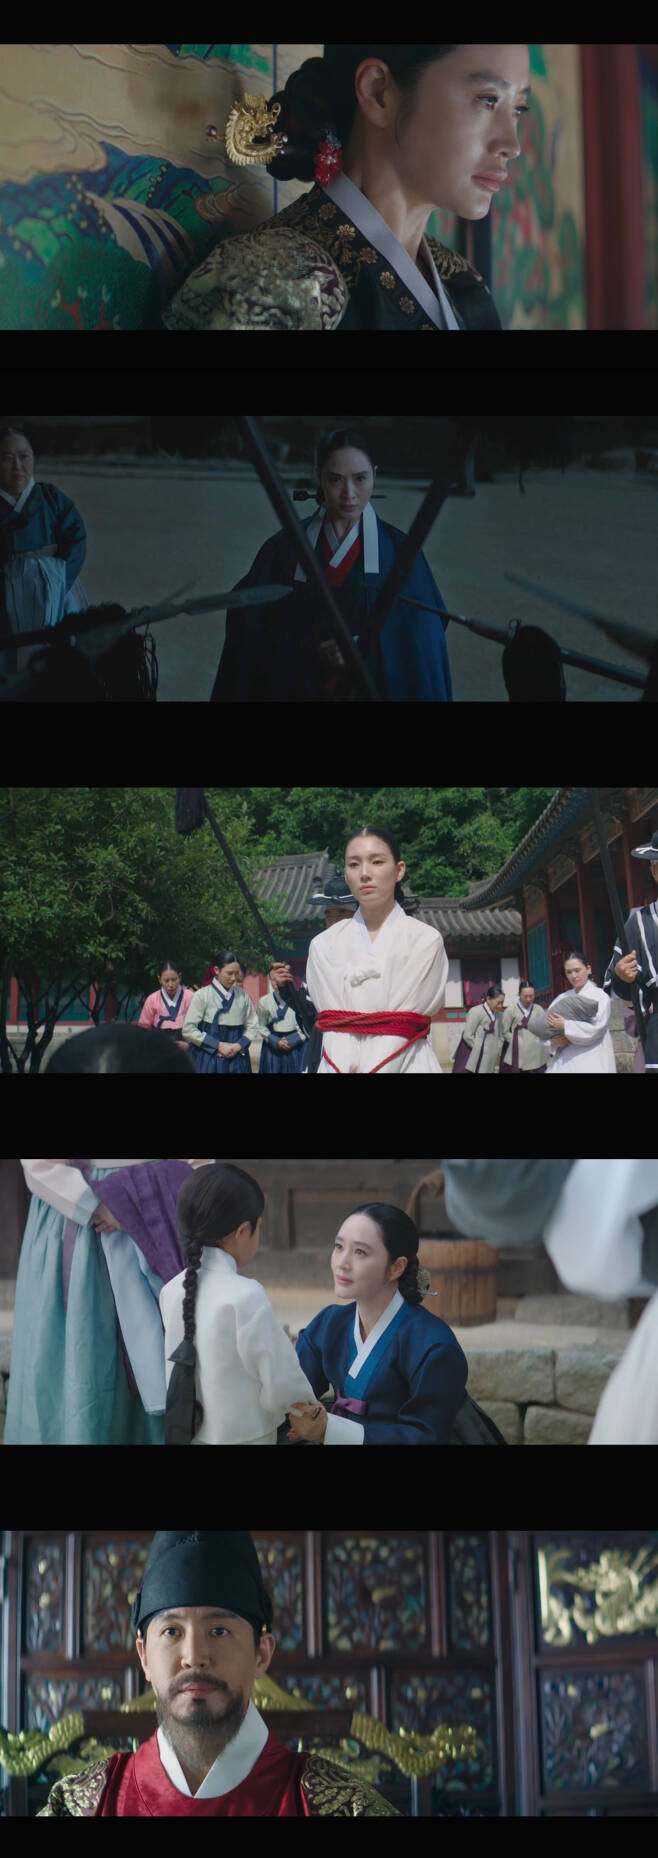 In the seventh episode of the TVN Saturday drama Schrup (screenwriter Park Barra / director Kim Hyung-sik / Planning Studio Dragon / Production How Pictures) broadcasted on the 5th, Kim Hye-soos wisdom and spirit, which uses the waves that are pushed to the winner temperament, caught the viewers.In the broadcast on this day, Daebi (Kim Hye-soo) and the ministers move to pass on the death of the crown prince to Hwaryeong and carry out Taekhyun was causing a strong wind in the palace.In particular, he pointed out that the middle palace, which had been treated secretly by the tax collectors, was behind the permission of external medicines, and drove Hwaryeong into the corner.When the external medicines proved to be the sign of the taxa and the lament of Hwaryeong spread to Chu, Daebi and Yeonguijeong (Kim Ui-seong) were convinced of their victory.At that moment, Hwaryeong confessed that she had received external medicines from Sejabin, opening a new phase of the incident.Hwaryeongs sudden movements continued even late at night when darkness fell. He went to the contrast and came to the third party 20 years ago, pressing the secret of the death of Taein Seja and summoning Yeonguijeong.Instead of allowing Tae-hyun, he proposed the abolition of Sejabin and his grandfather, and when Sejo of Joseon could not become a taxpayer, he went to the position of the middle war, saying he would step down on his own.Contrast and Yeonguijeong thought that Hwaryeong, who had been driven to the limbs, threw an irrational number, but there was no reason to reject it.It is easier to remove the original hand from the outside of the palace, because it is better than the Sejo of Joseon, which is lacking in qualities, and it is a good idea to place the righteous army (Kang Chan-hee) in the seat of the king.As a result, Sezabin was expelled from the royal court with his eldest son for being a prisoner of death for bringing the taxa to death. The people of the royal court touched the poison of the middle war that pushed the family of the taxa to the cliff for the preservation of the place.However, this was a detailed plan of the Hwaryeong to listen to the request of Sejabin, who wanted to go to the palace. In front of Sejabin and his grandfather, who entered a safe house rather than an exile, there was a Hwaryeong who greeted them with a warm smile.Even if those who do not know the inside point their fingers at him, the great sacrifice of Hwaryeong, who took all the blame to keep the promise with the dead tax collector, shone.I wonder how the big picture of Hwaryeong could have succeeded. There was a psychological warfare that read the number of the opponent and looked forward one step further.First of all, Hwaryeong predicted that the threat of preparation would not be realized, saying, If you do not acknowledge the use of external medicines, I will reveal that you went to see Yoon (Seo Yi-sook).It is a hand that can weave Hwaryeong into a reverse order, but if you dig into the reason you met, you would not be able to know that you would be angry with yourself.It was also an intentional act to lower the vigilance of the opponent in an attempt to secretly tie up with Kwon (Kim Jae-bum) who was trapped in prison.Even though the middle war was pointed out behind the use of external medicines, it seemed like an inevitable choice because it was pushed to the edge of the cliff.In addition, unlike the contrast of stimulating inferiority and taking advantage, the way of comforting the wound moved the mind of Lee Ho (Choi Won Young), who opposed Tae Hyun.Lee believed in his children and confirmed his sincere desire to take the place of the middle war.Twenty years ago, he became king in the hands of the prosecutors for the reason of the wisest and choosing It, but it was obviously wise and it was the king himself who wanted to realize the essence of Taepyeong Sungdae with his own strength.It is noteworthy who will become the winner of Taekhyun and win the princes seat.